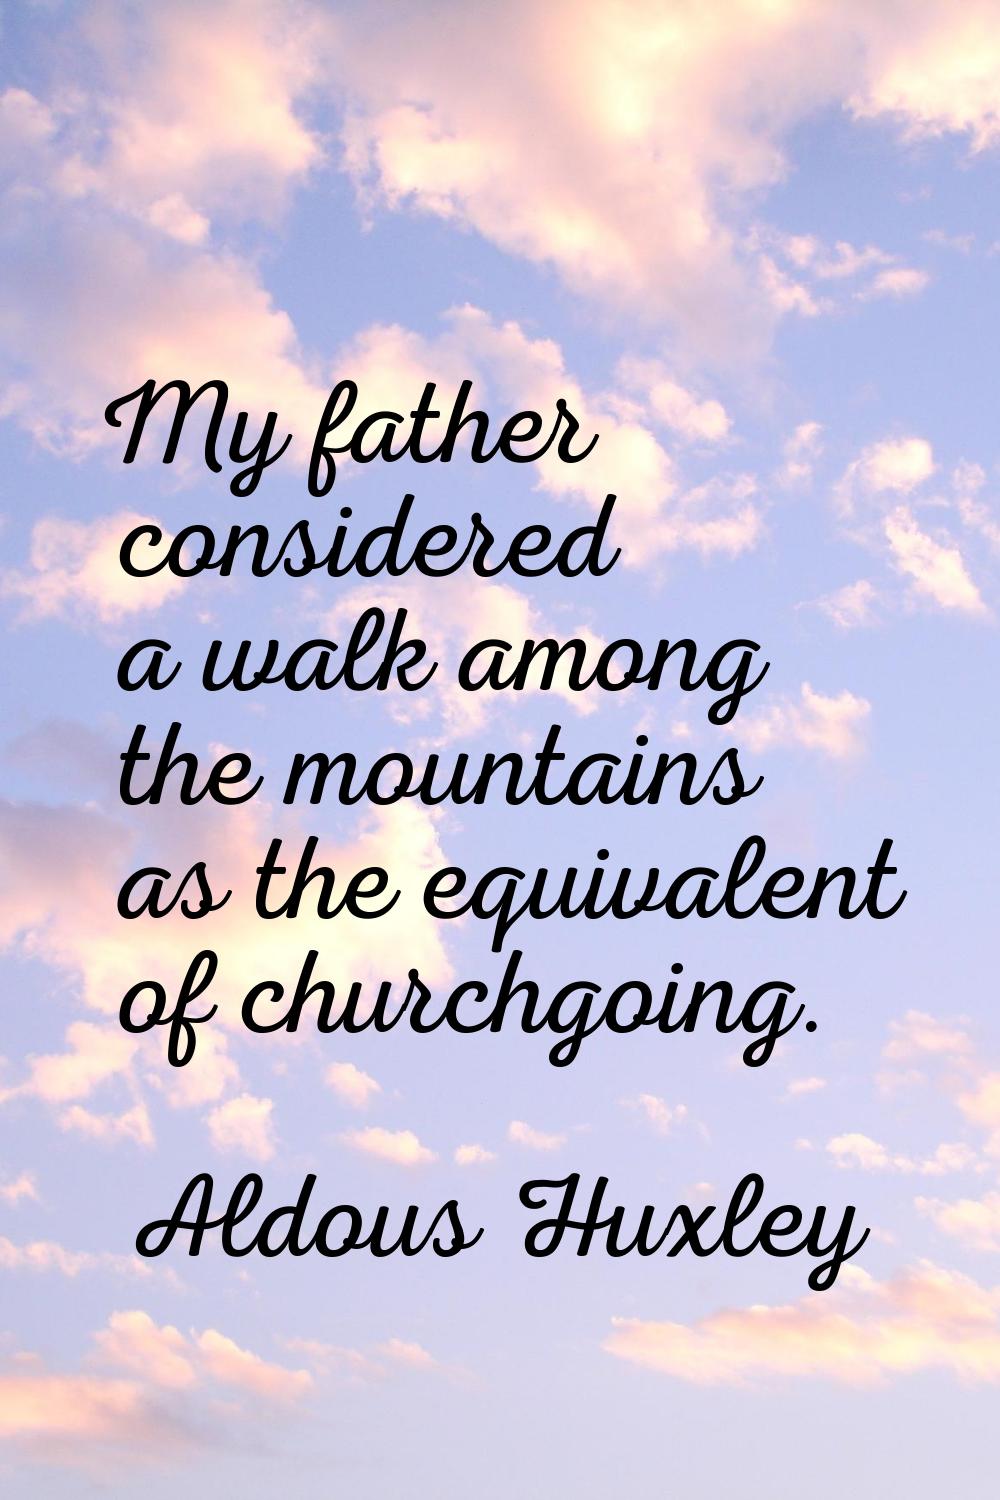 My father considered a walk among the mountains as the equivalent of churchgoing.